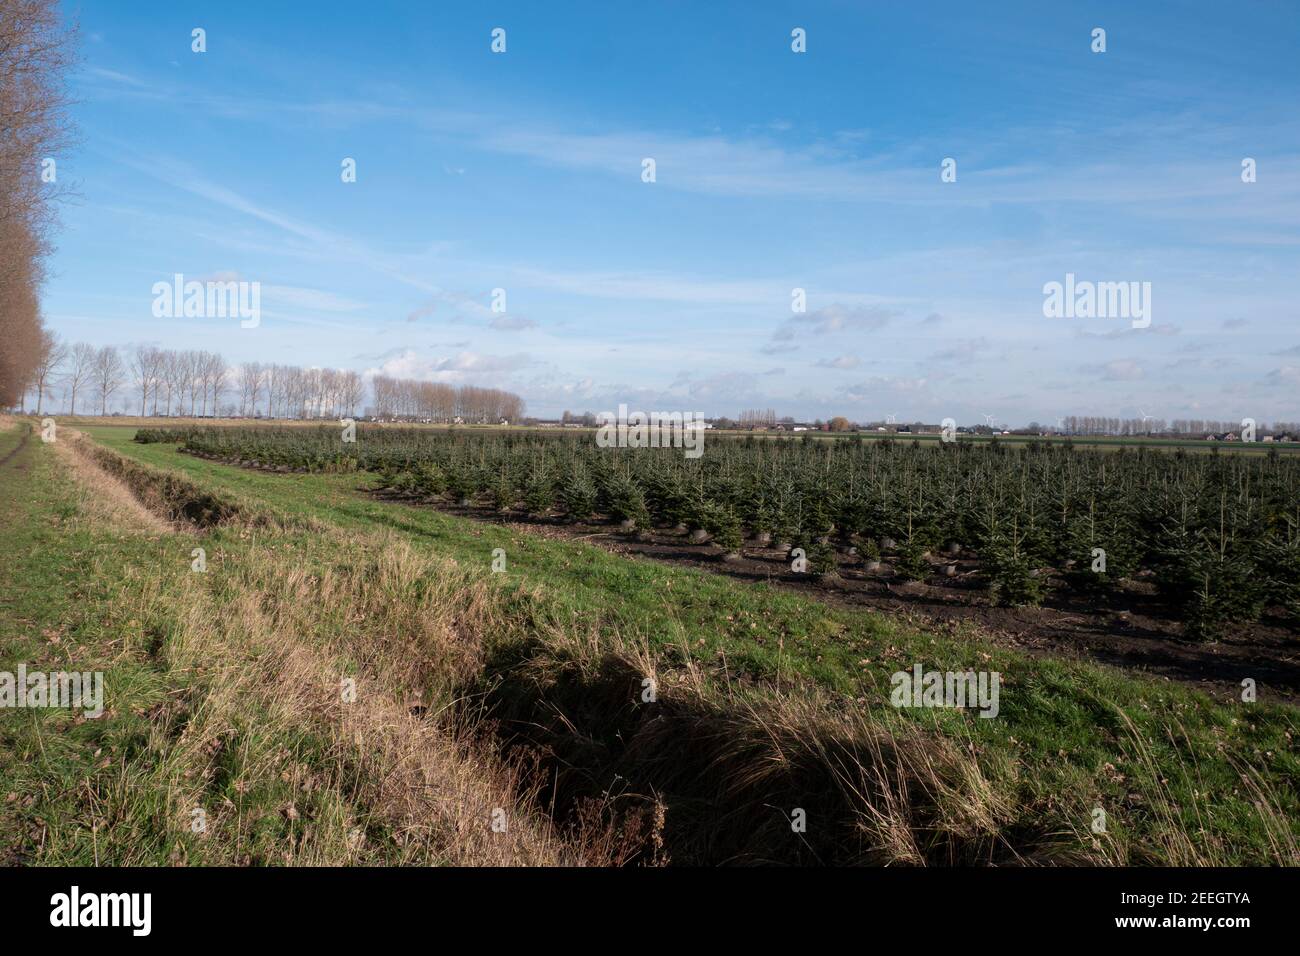 landscape photo of a field full of small pine trees to be used as a Christmas tree in December Stock Photo